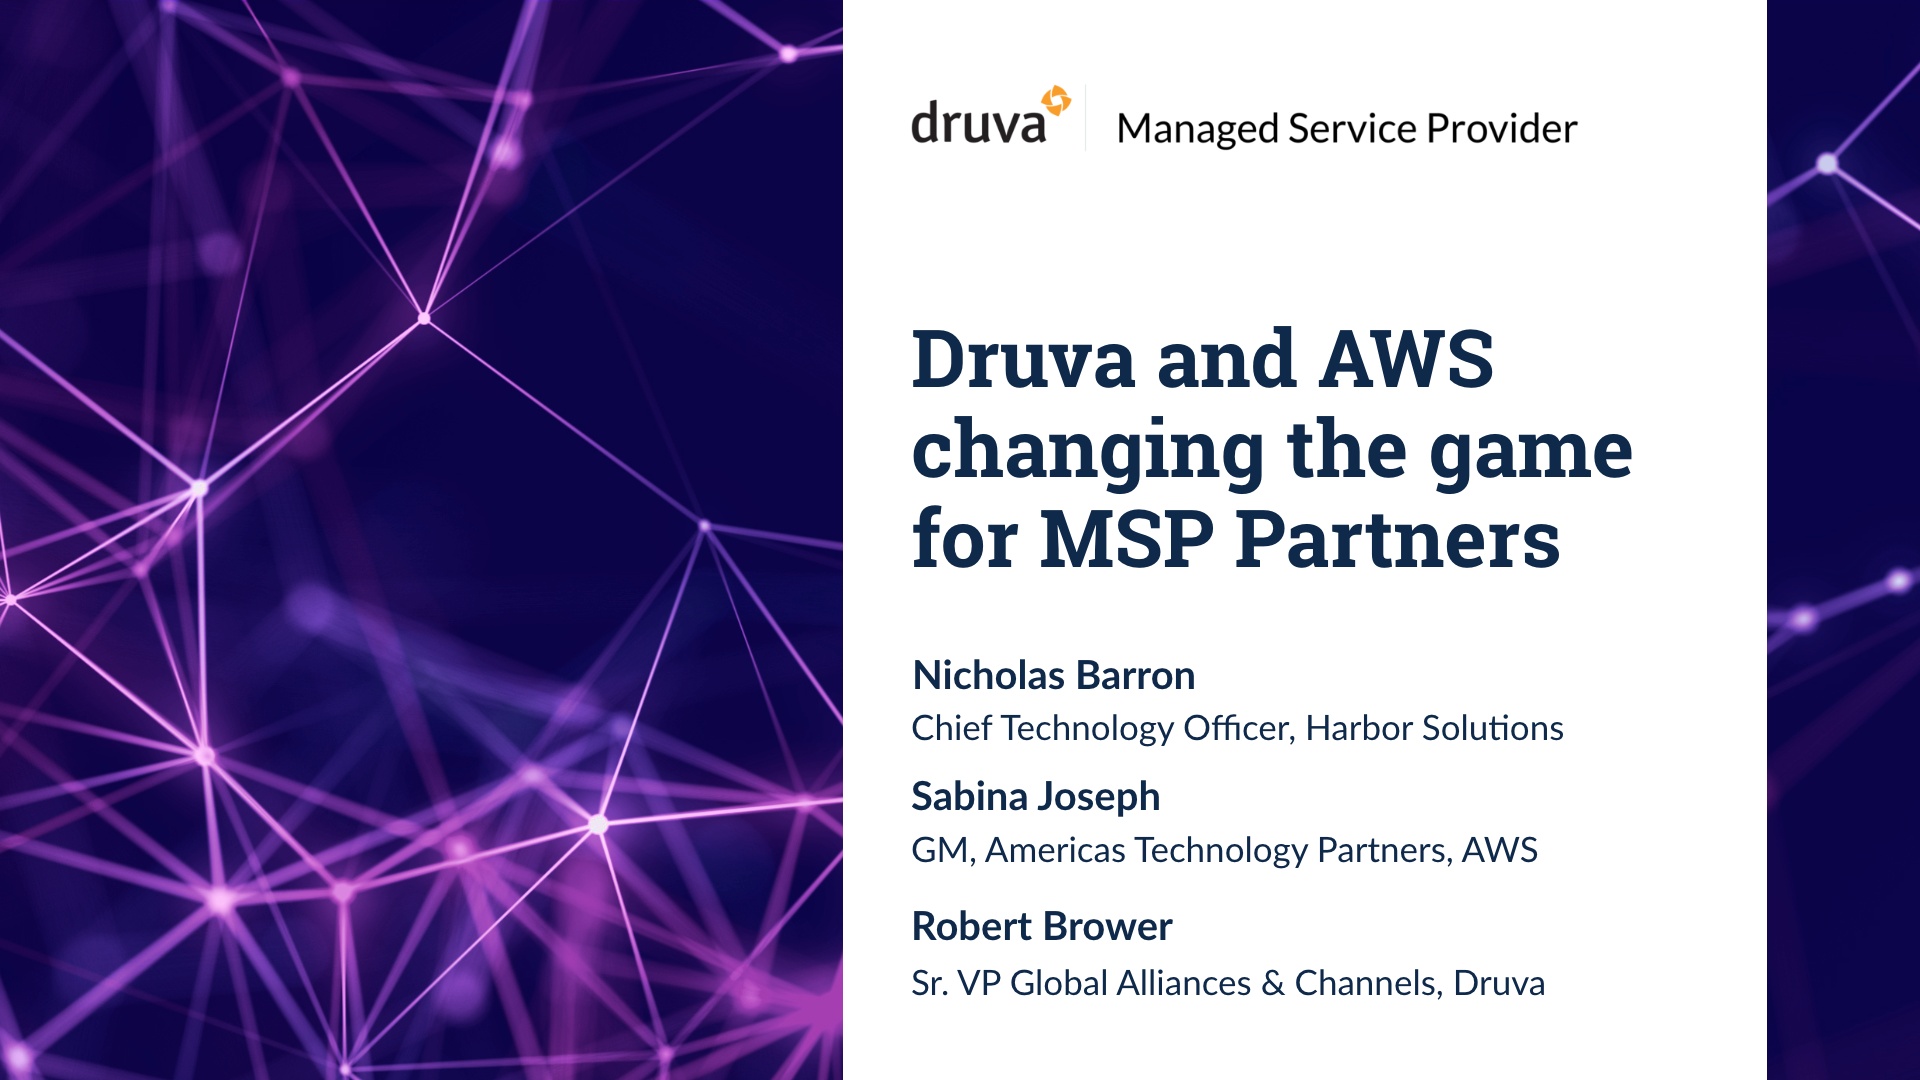 Druva and AWS changing the game for MSP partners